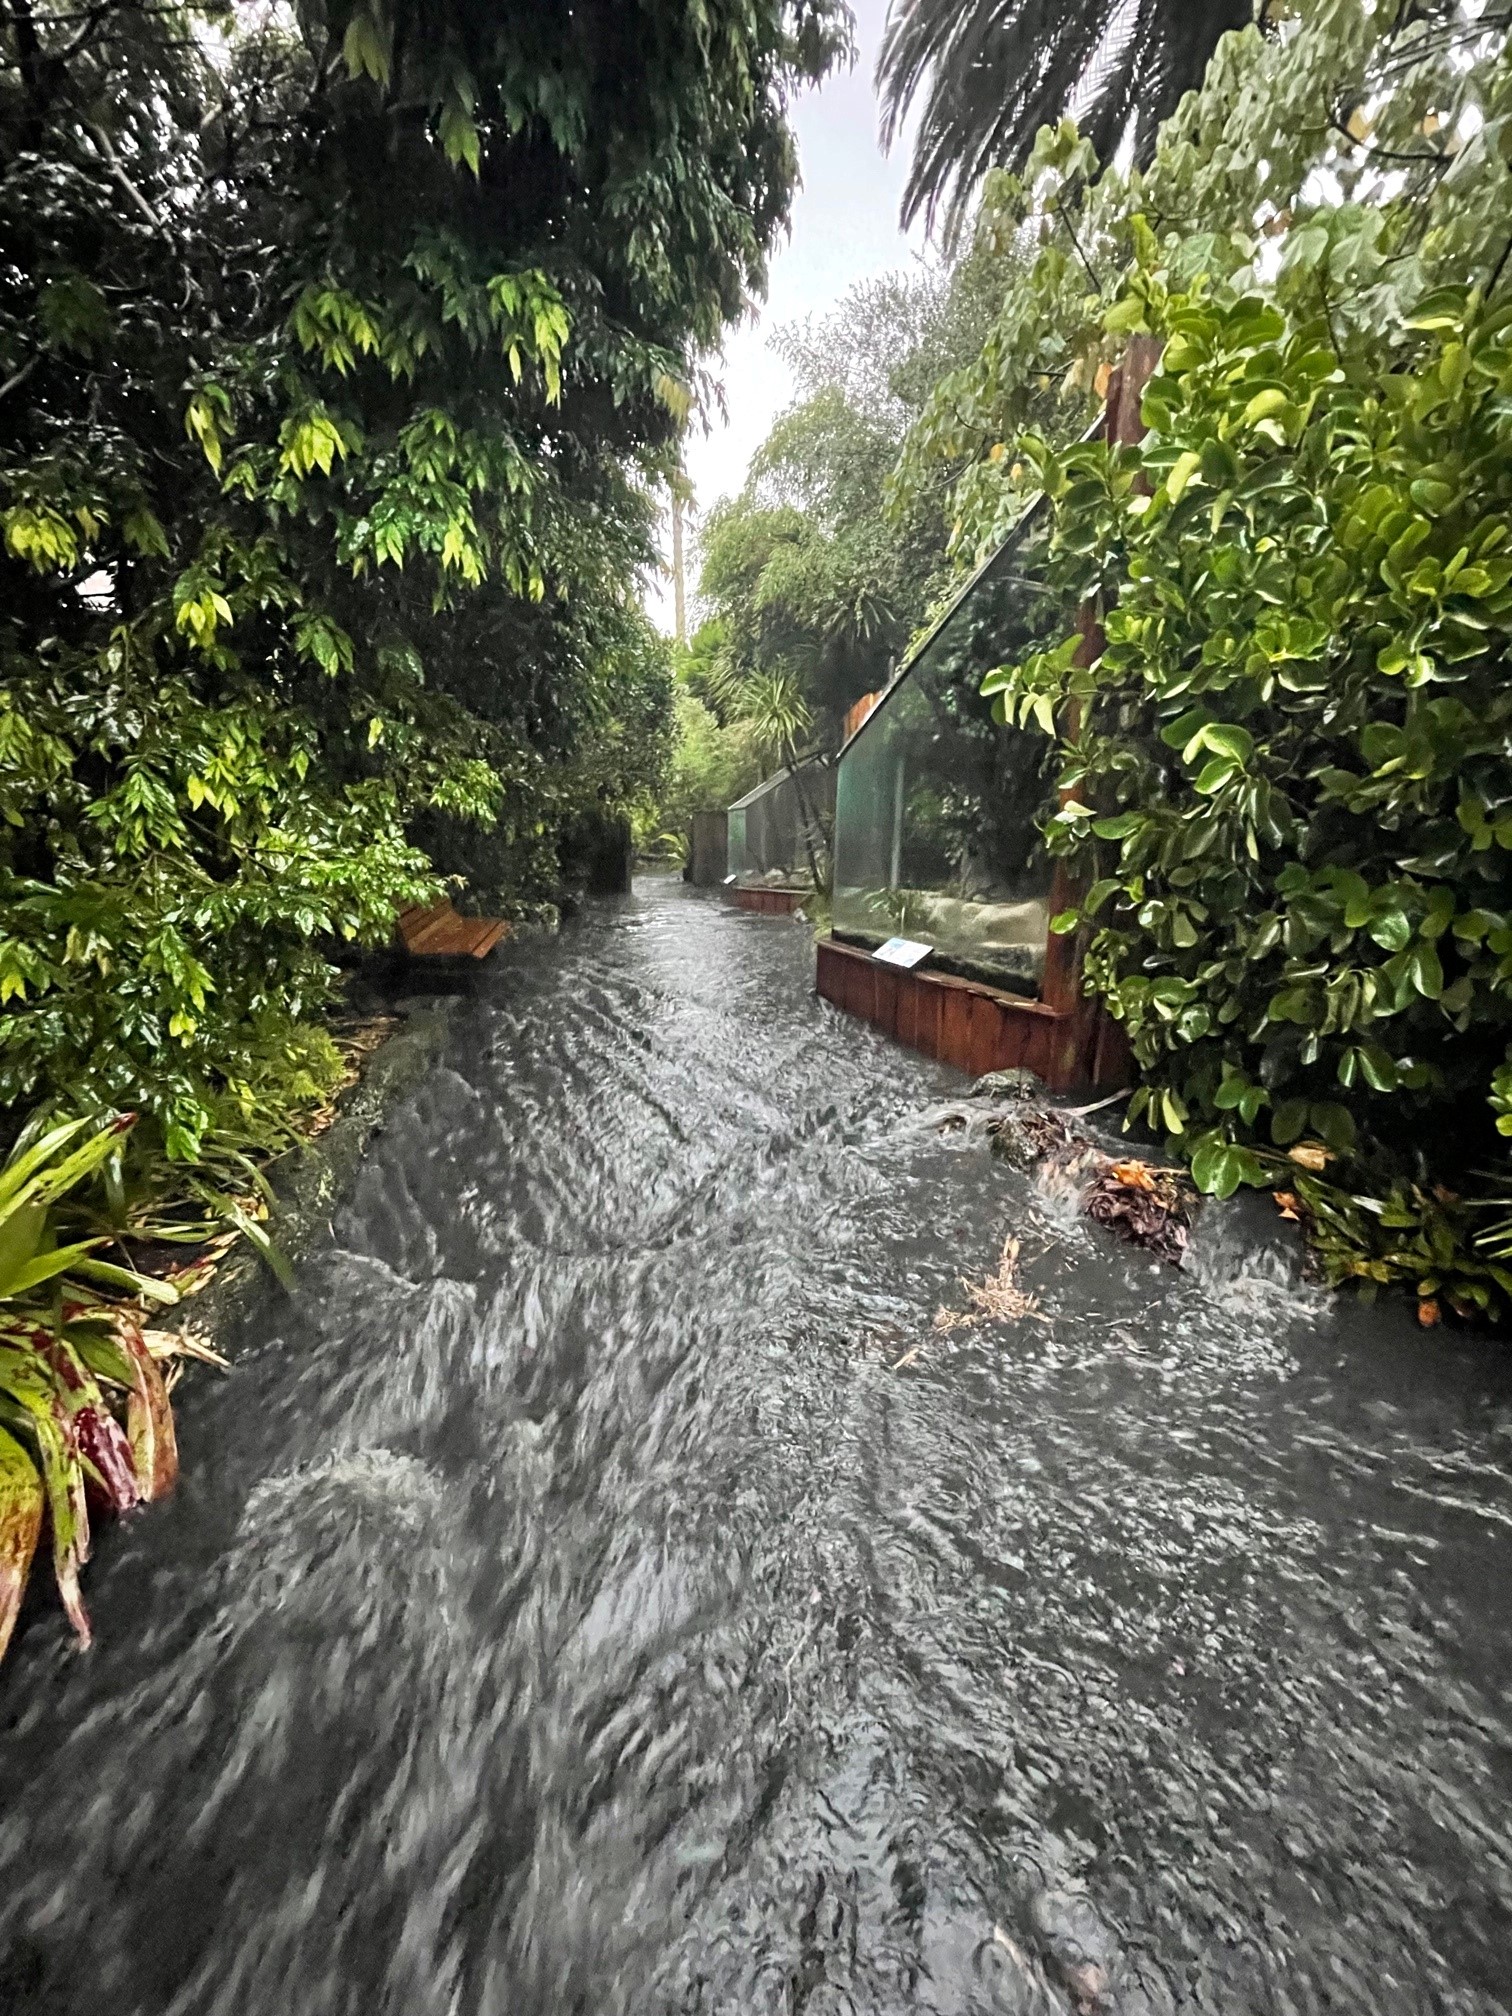 Flood water running down a lane at Auckland Zoo with trees on both sides